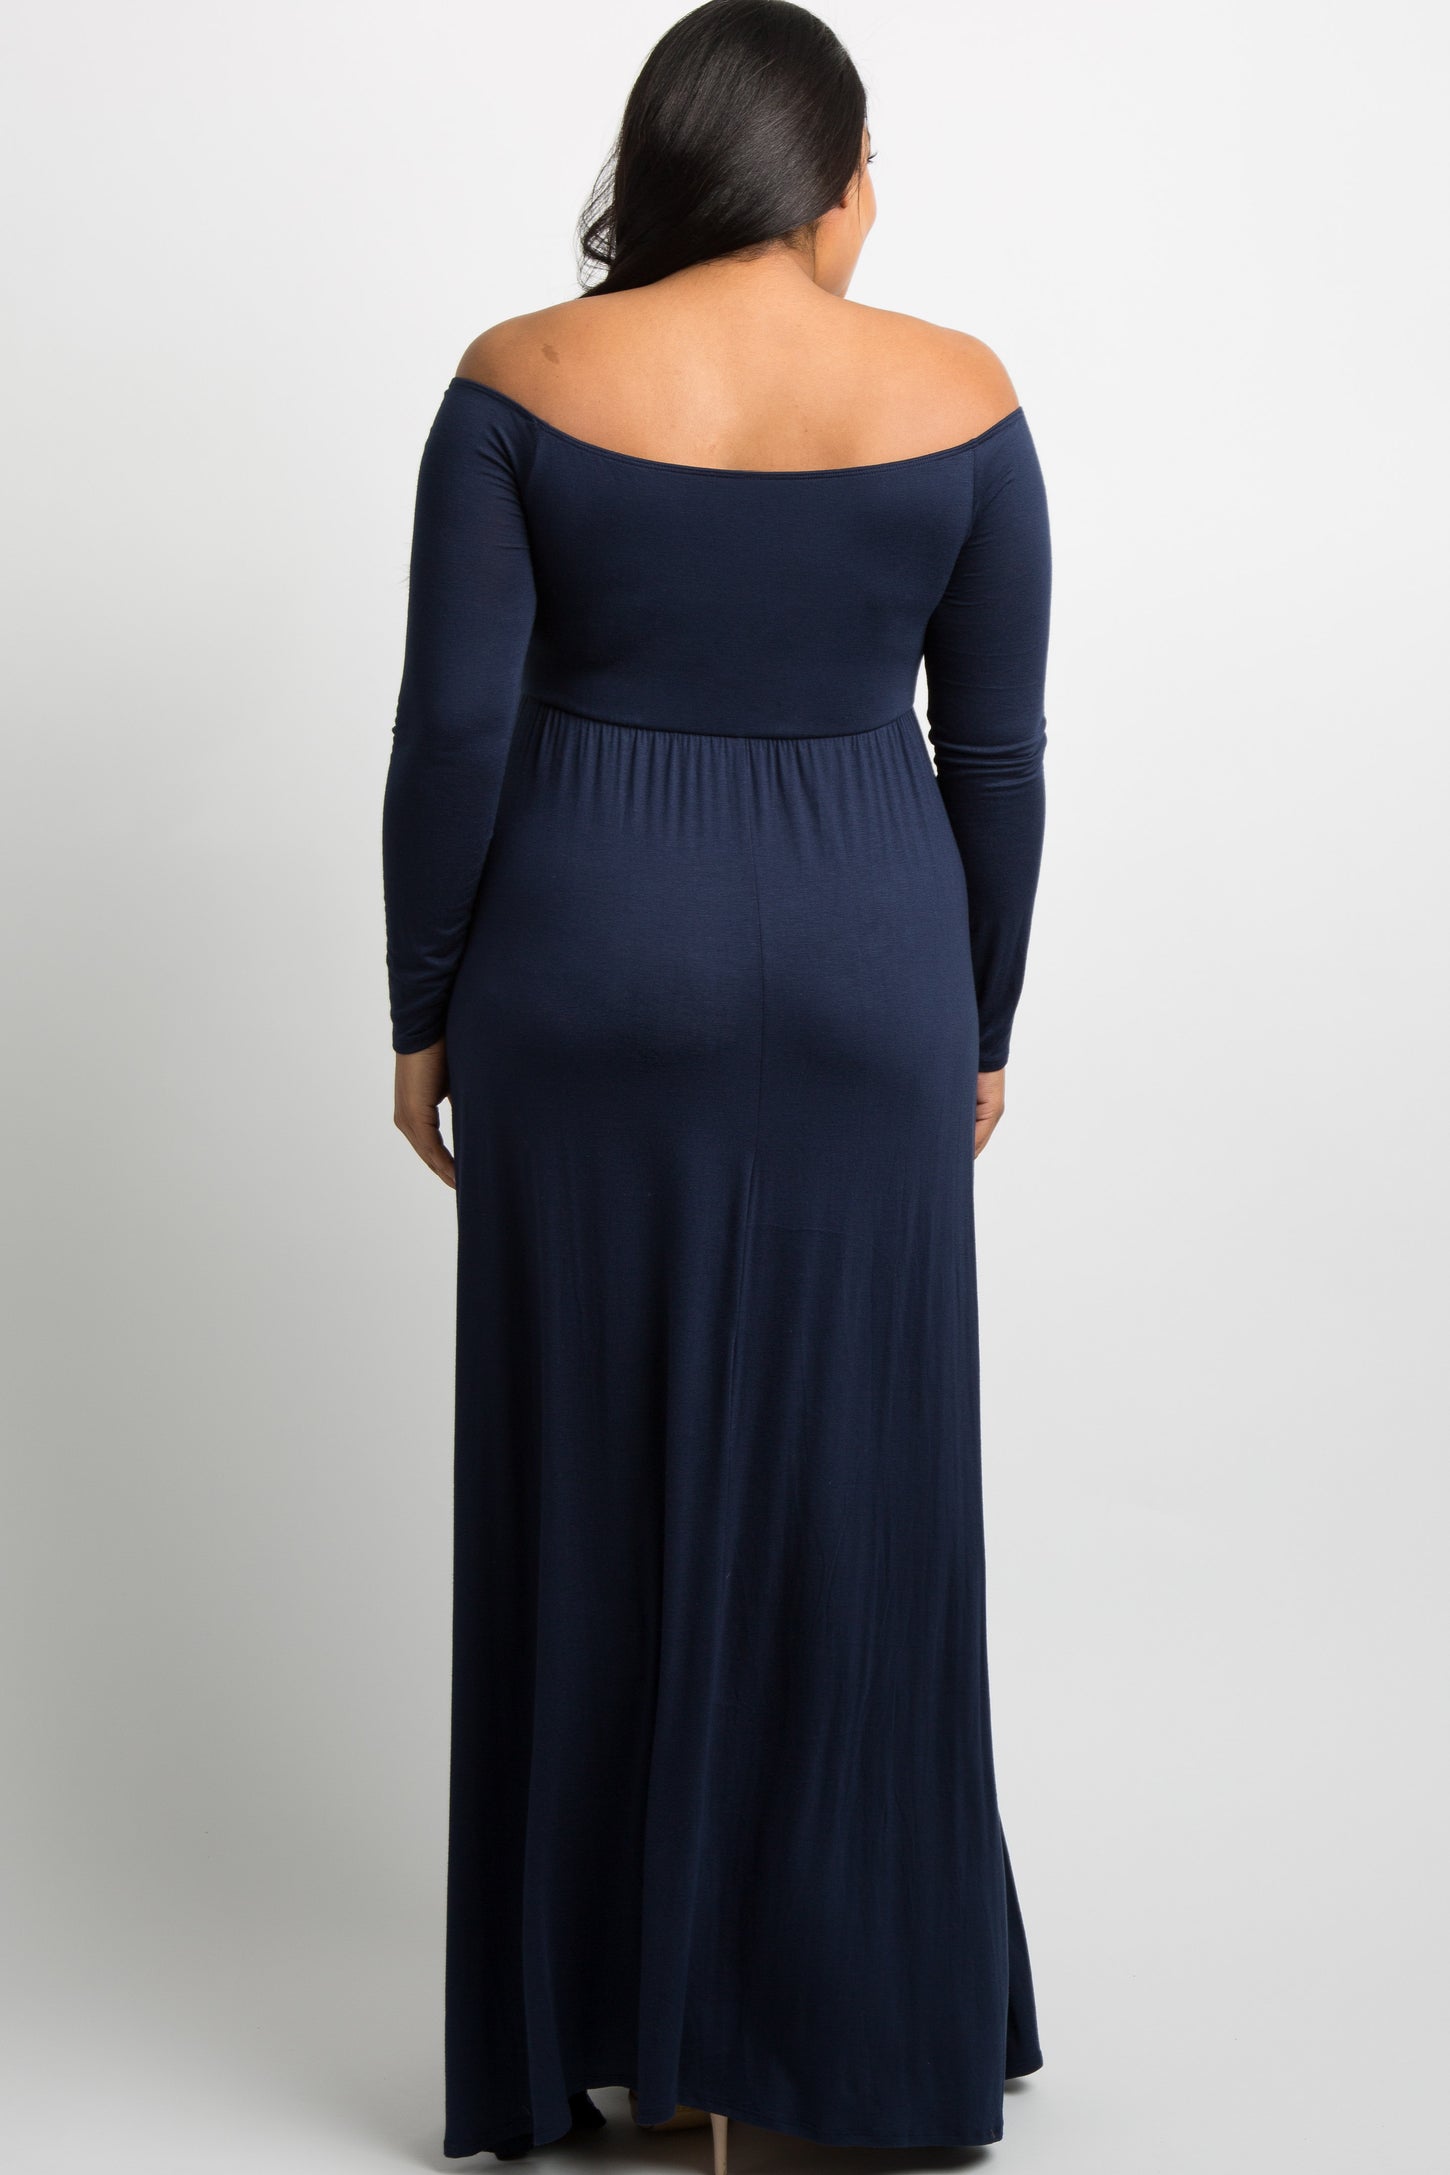 PinkBlush Navy Blue Solid Off Shoulder Maternity Plus Maxi Dress